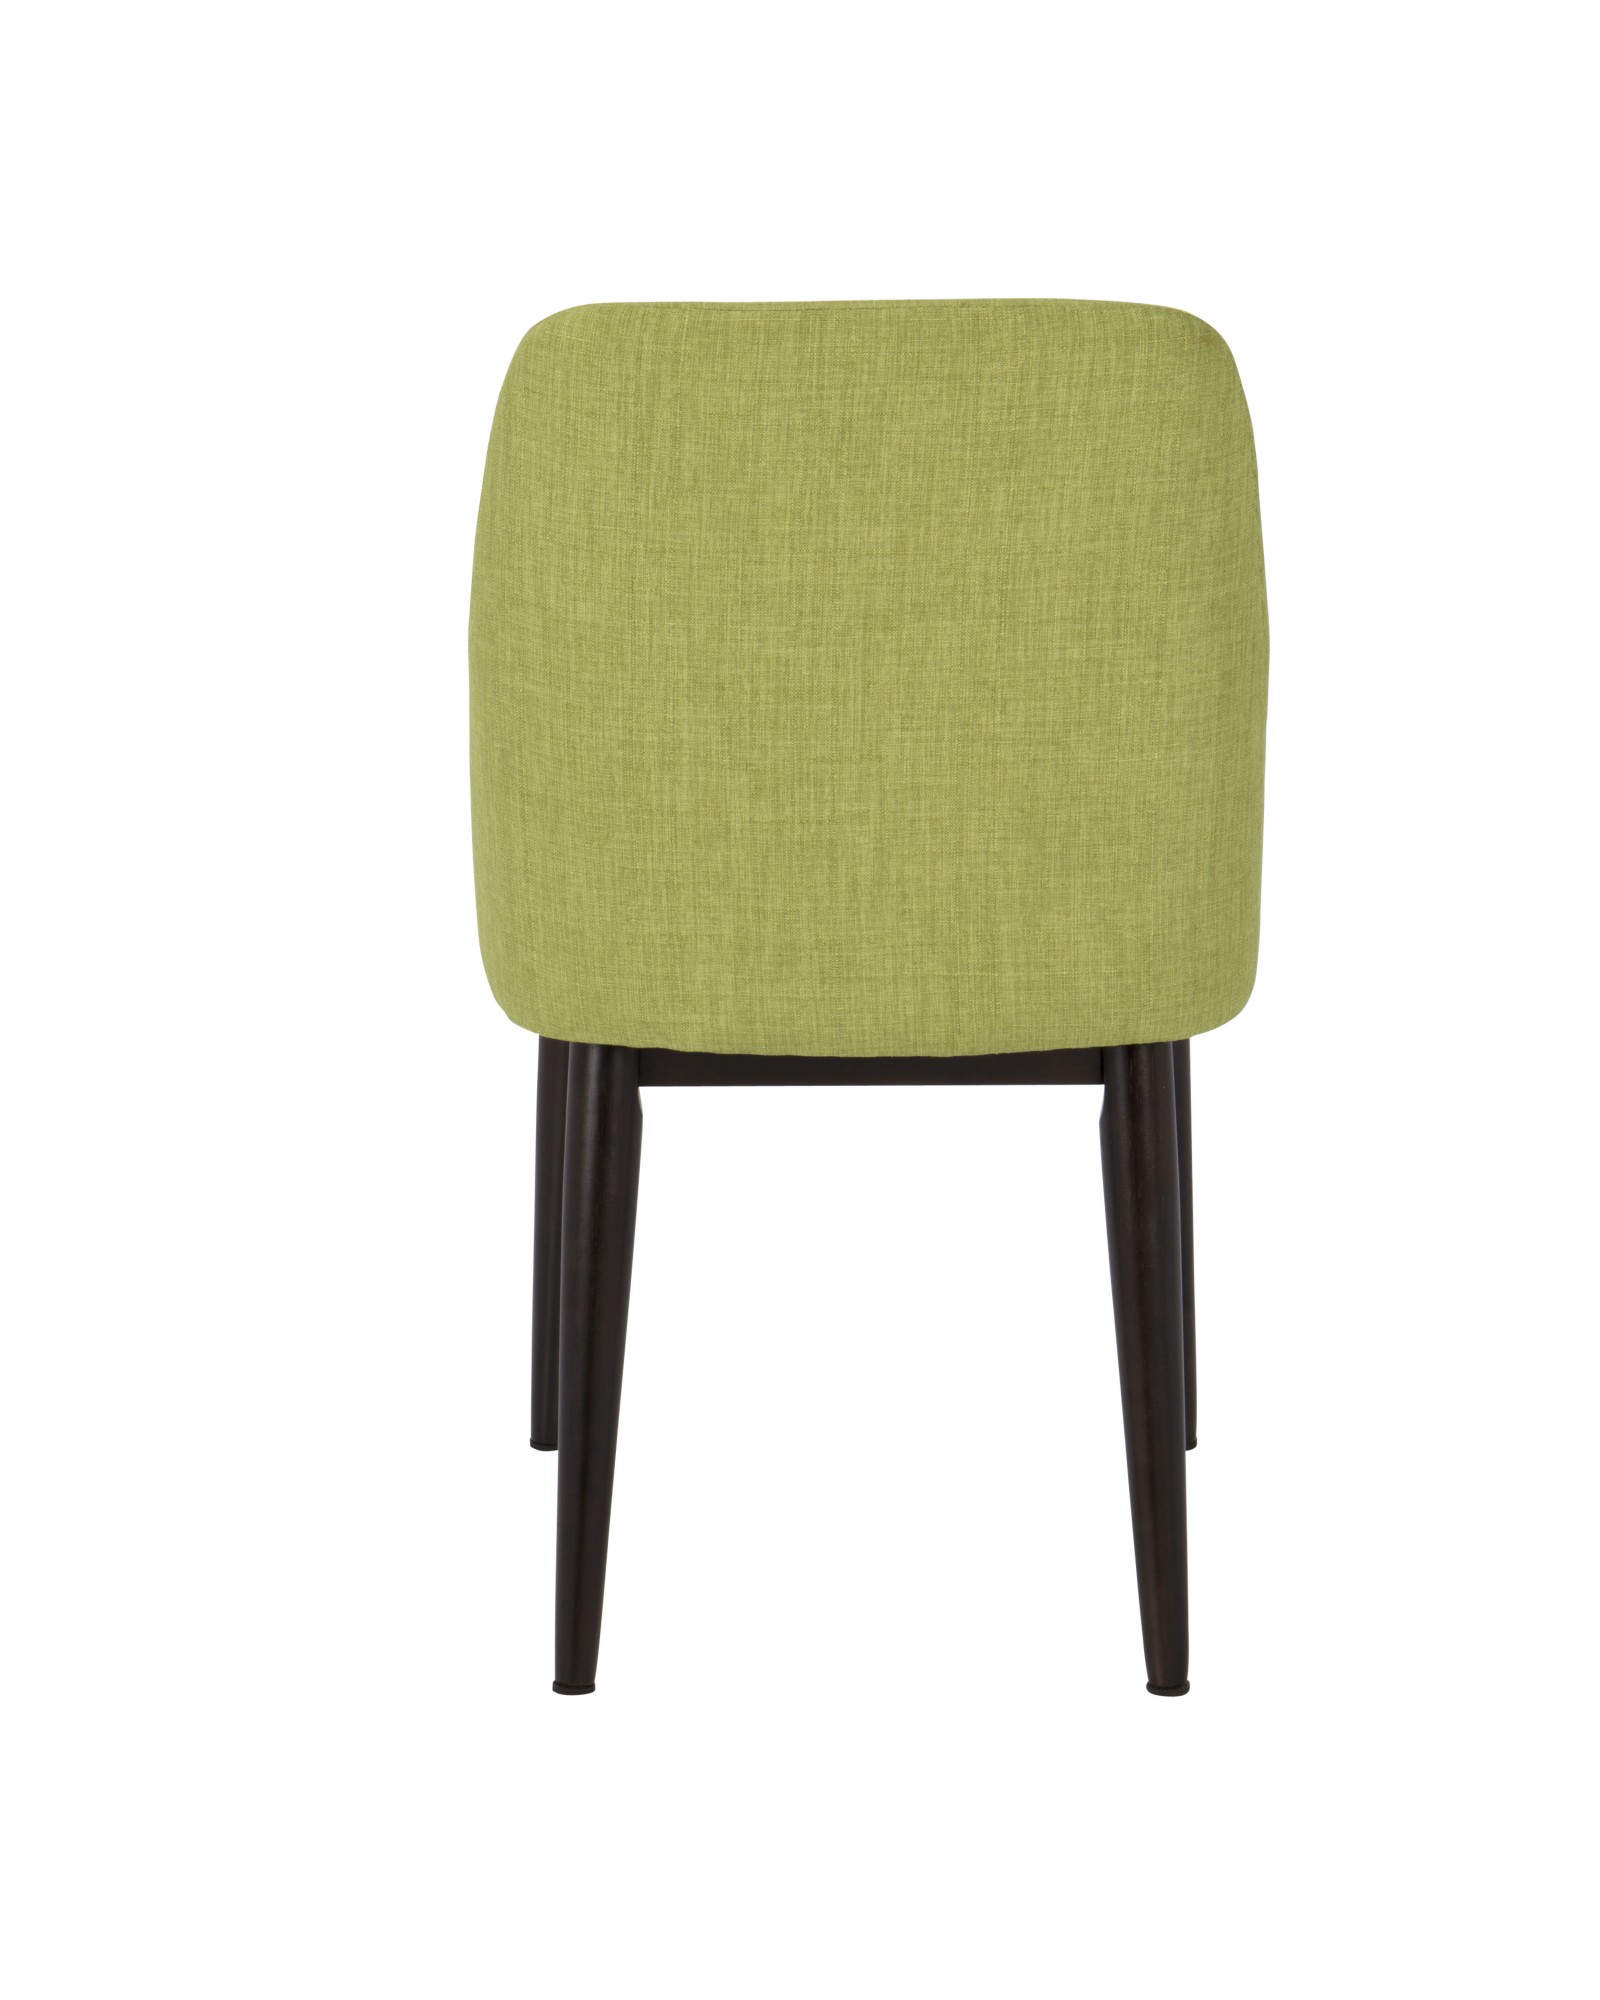 Tintori Contemporary Dining Chair in Green Fabric - Set of 2